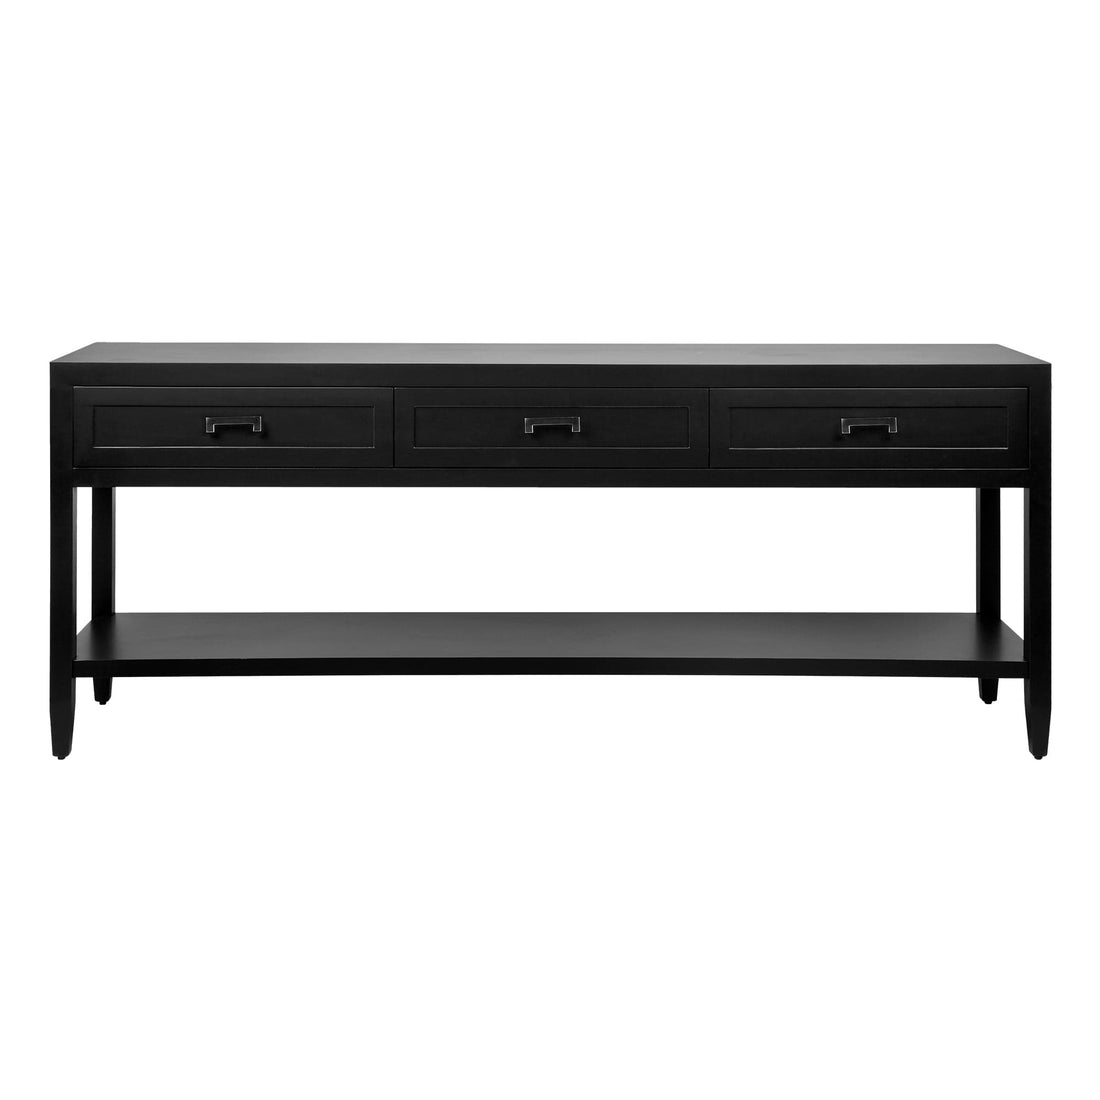 Cafe Lighting & Living Soloman Console Table - Large Black